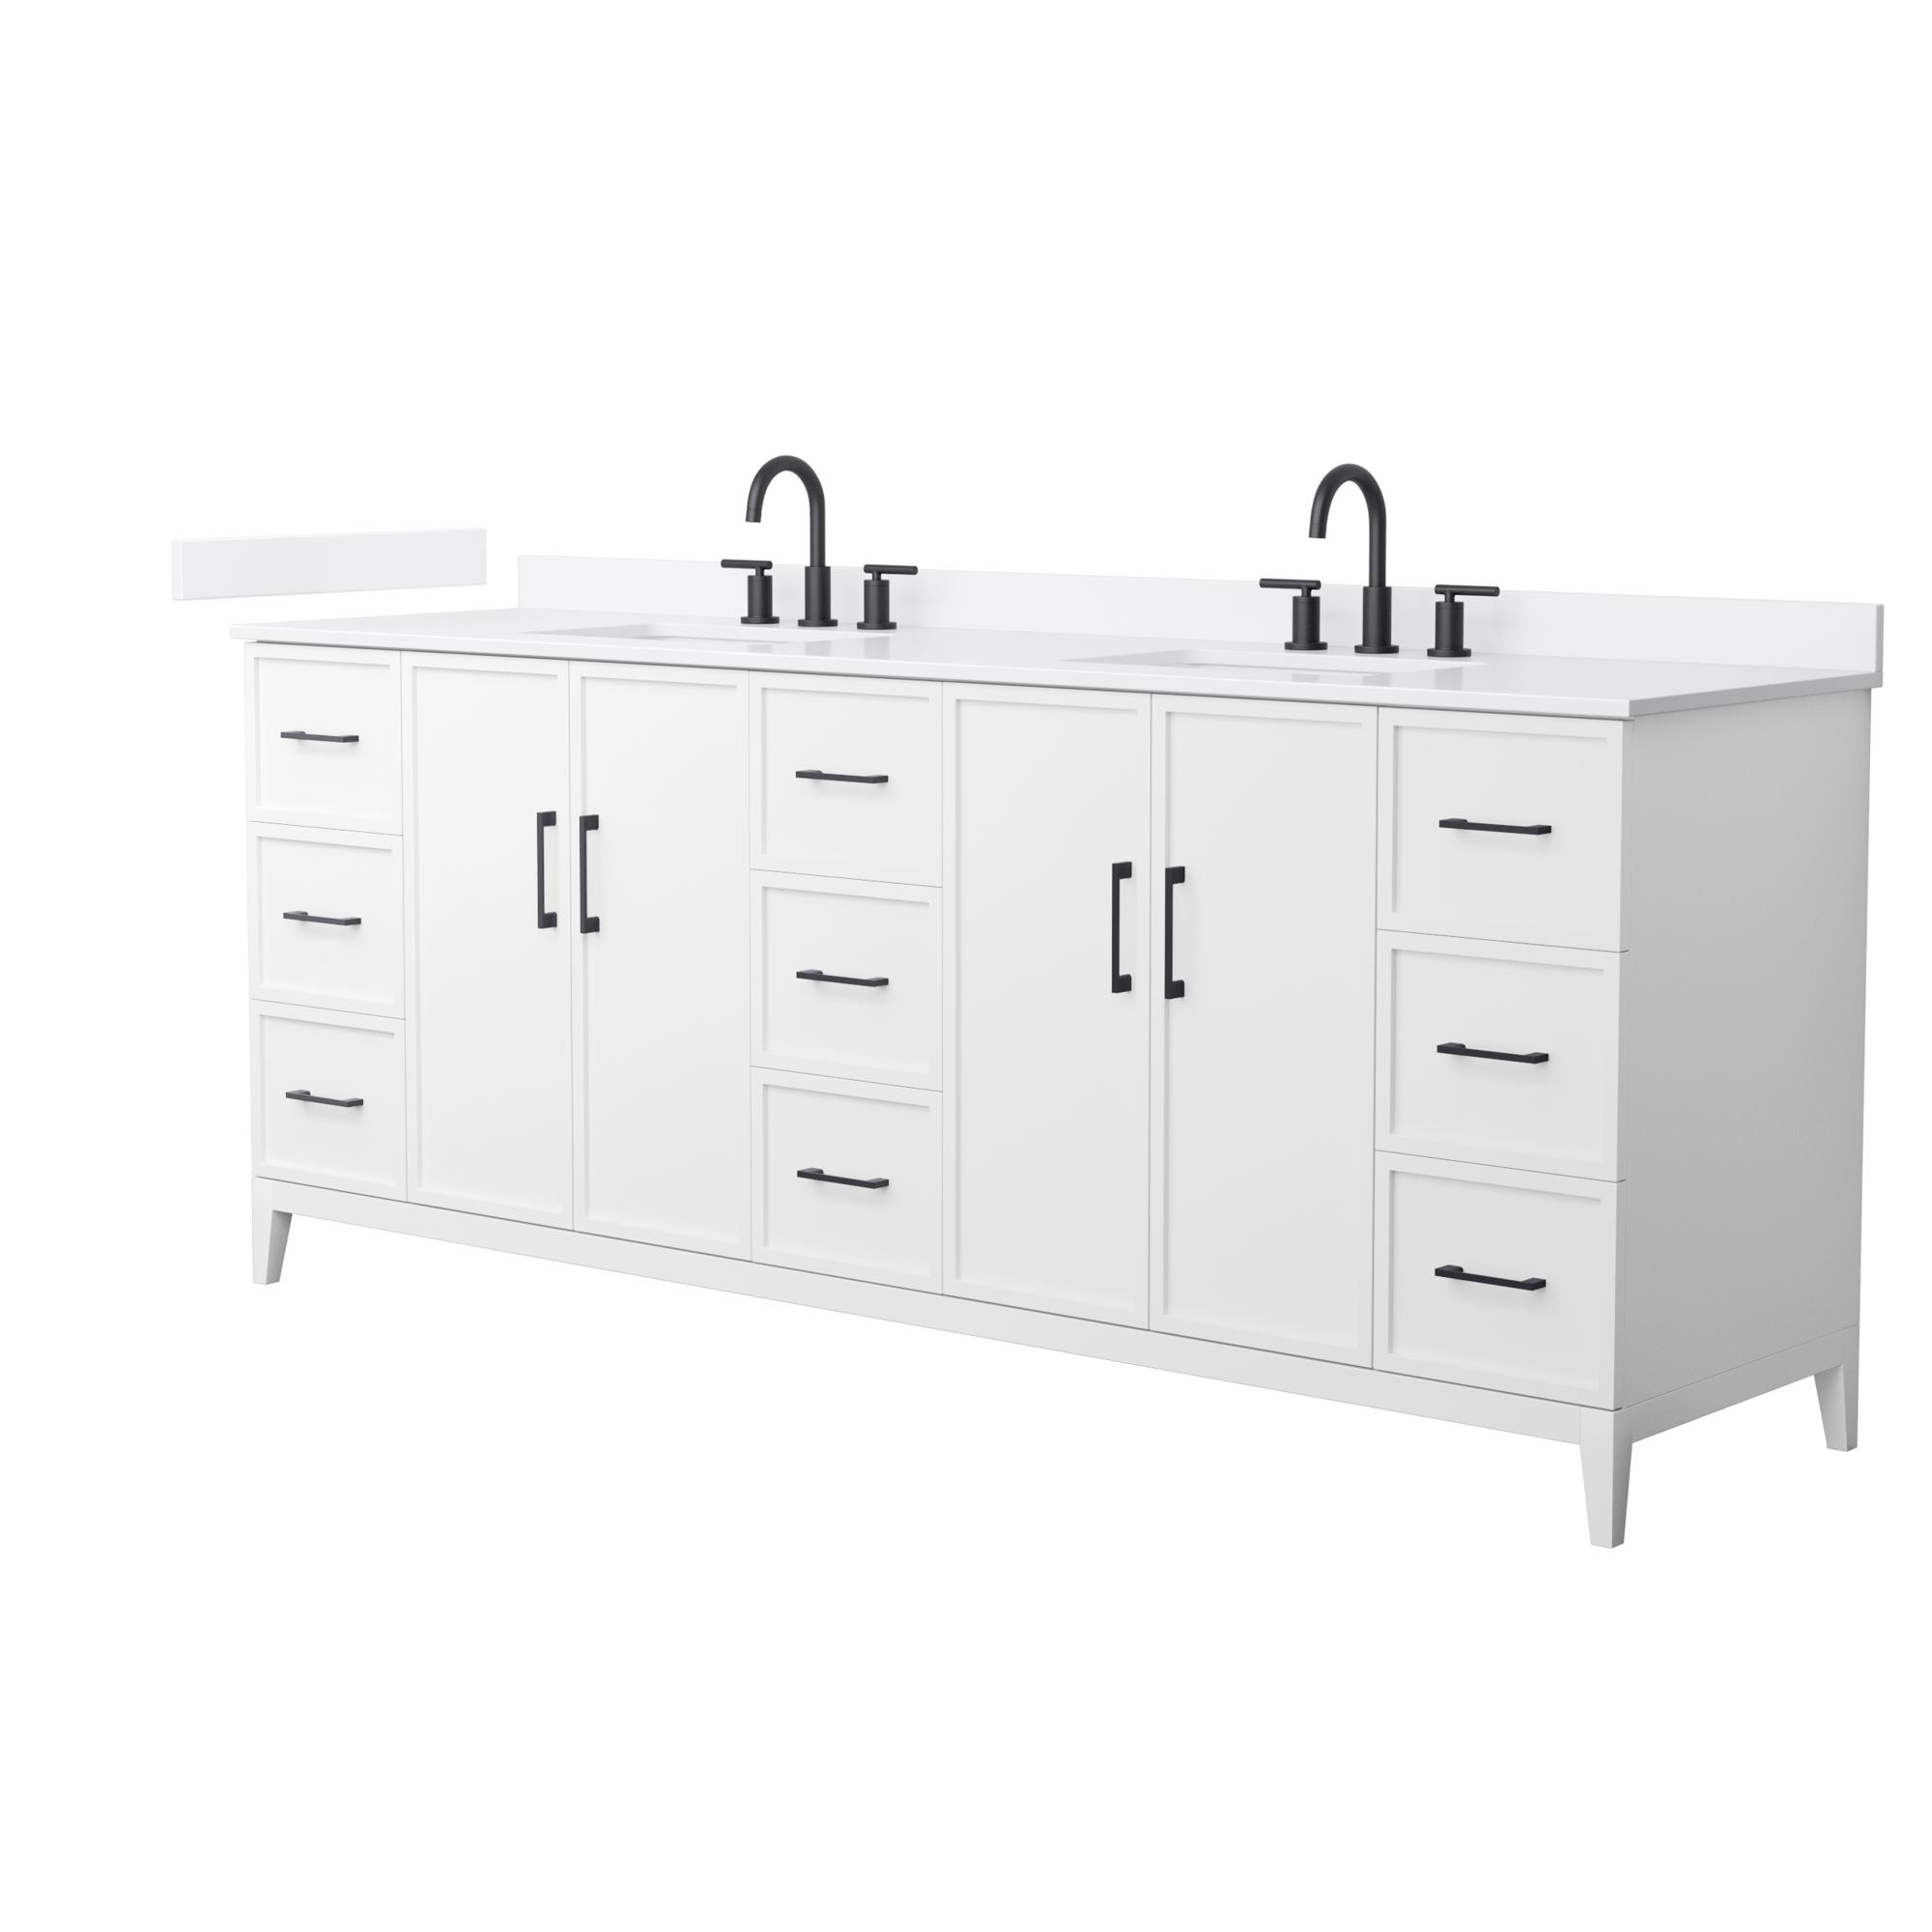 84" Transitional Double Vanity Base in White, 7 Top Options with 2 Hardware Option